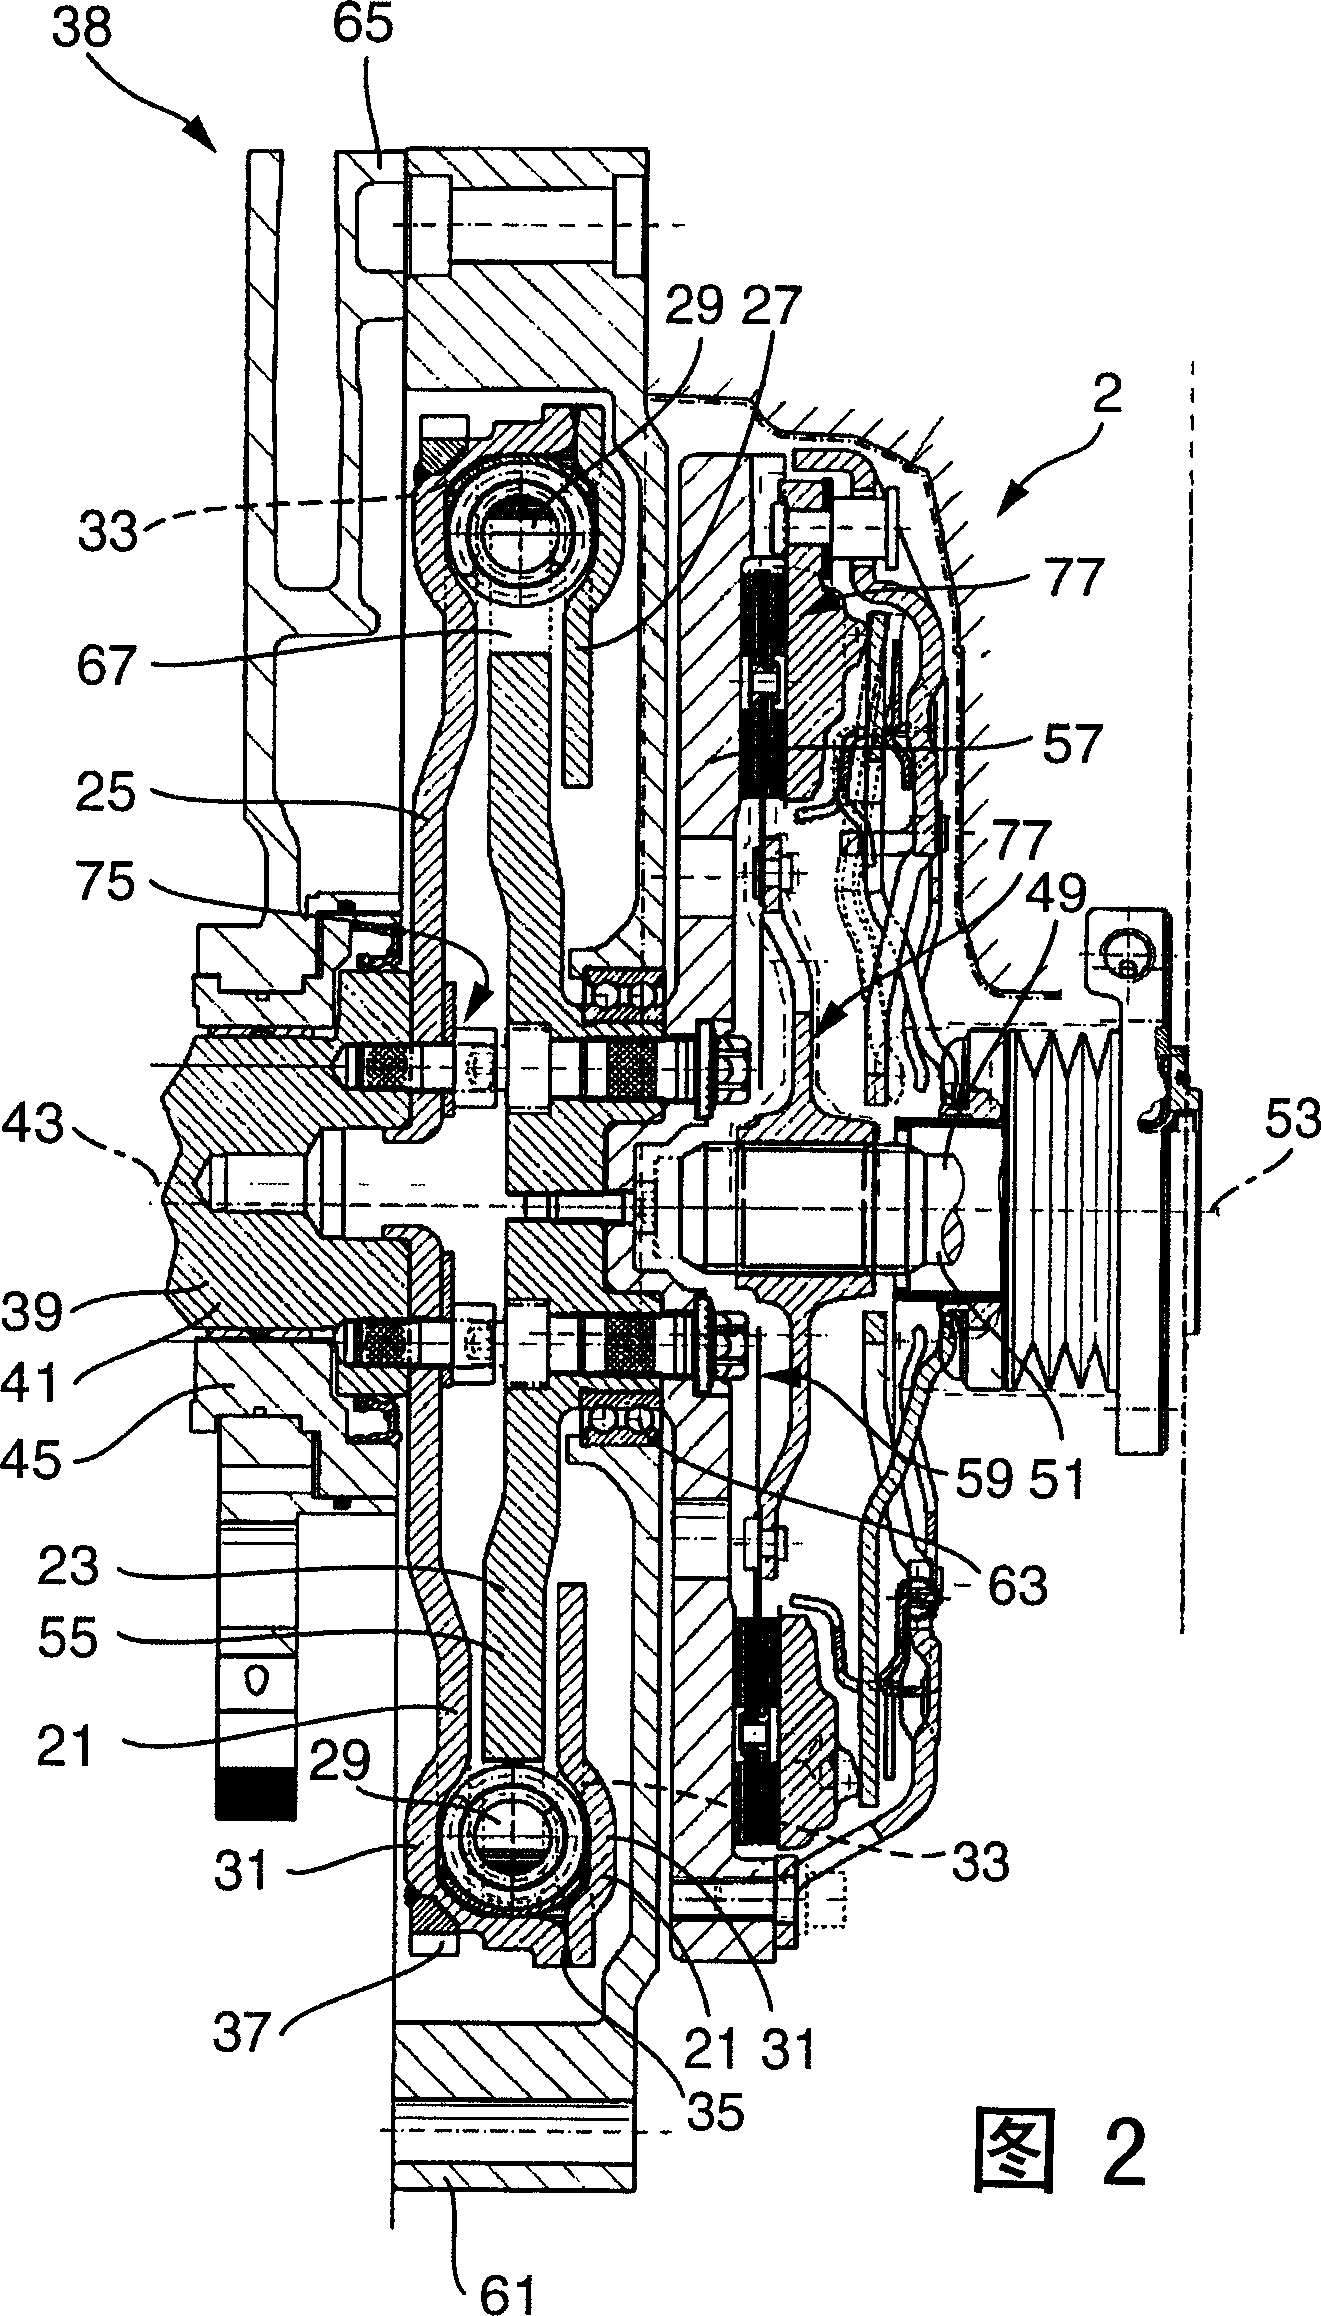 Device for coupling two shafts having an axial offset